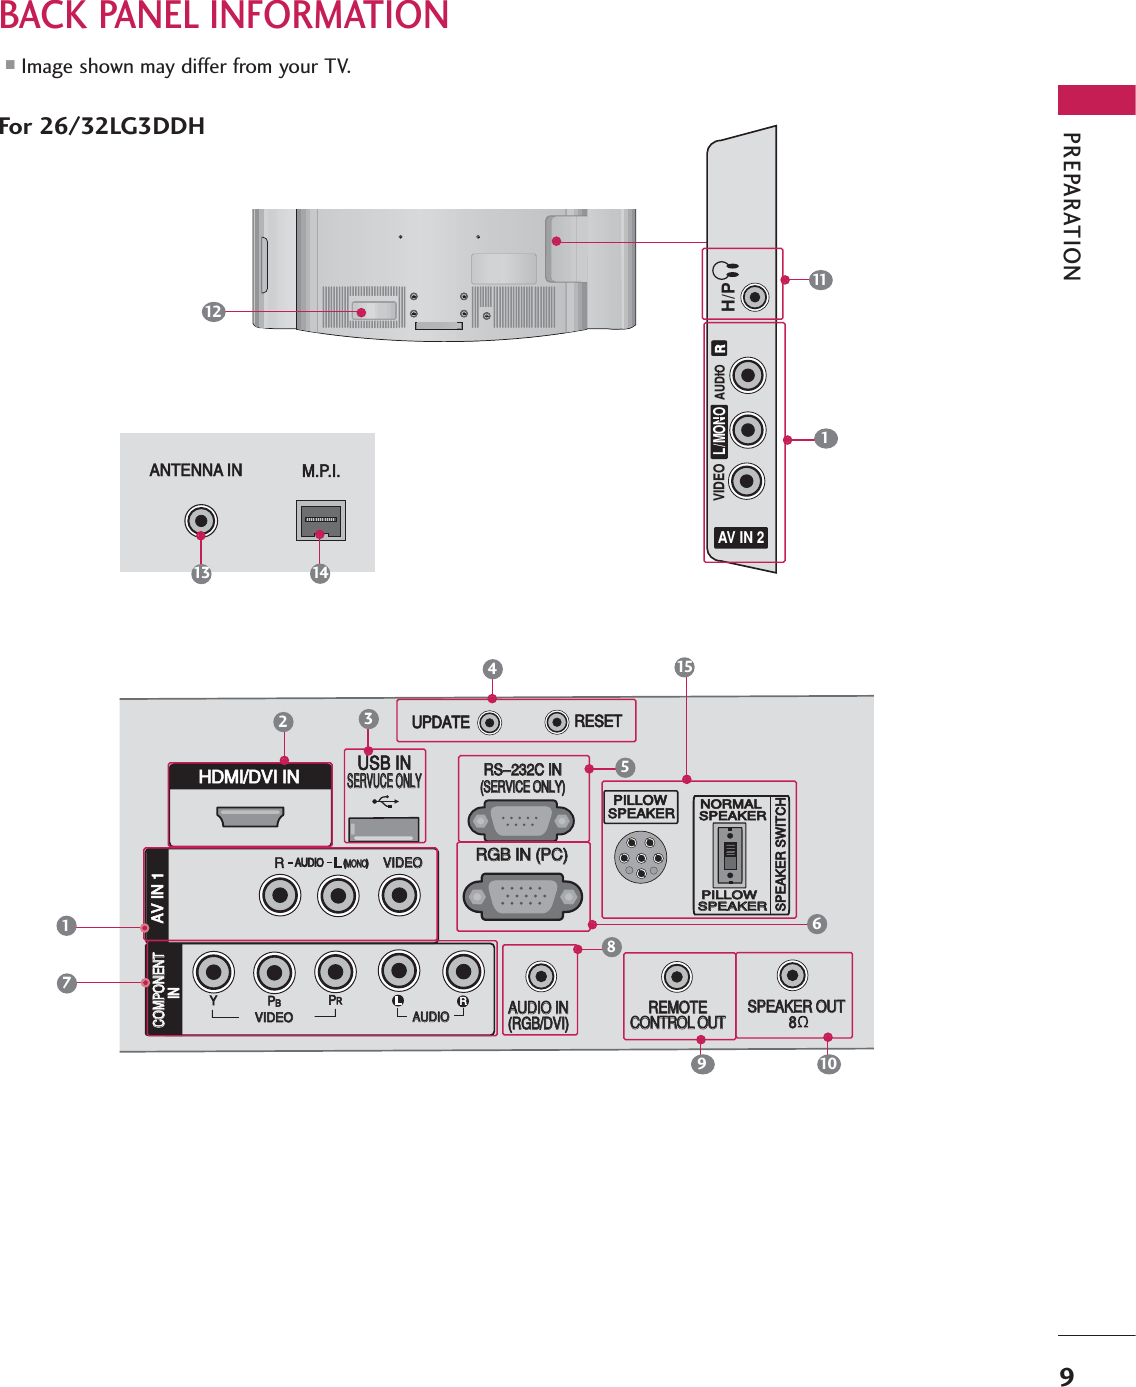 PREPARATION9BACK PANEL INFORMATION■Image shown may differ from your TV.111AUDIO IN(RGB/DVI)VIDEOAUDIOHDMI/DVI INUSB INSERVUCE ONLYAV IN 1VIDEOMONO(            )AUDIOS-VIDEOCOMPONENT         INRGB IN (PC)RESETUPDATERS-232C IN(SERVICE ONLY)REMOTECONTROL OUTSPEAKER OUT8  AV IN 2L/MONORAUDIOVIDEOH/PPILLOWSPEAKERNORMALSPEAKERPILLOWSPEAKERSPEAKER SWITCHPILLOWSPEAKERNORMALSPEAKERPILLOWSPEAKERSPEAKER SWITCH12AUDIO INAUDIO IN(RGB/DVI)(RGB/DVI)VIDEOVIDEOAUDIOAUDIOHDMI/DVI INUSB INSERVUCE ONLYSERVUCE ONLYAV IN 1VIDEOVIDEOMONOMONO(            )AUDIOCOMPONENTCOMPONENT         INRGB IN (PC)RGB IN (PC)RESETUPDATERS-232C INRS-232C IN(SERVICE ONLY)(SERVICE ONLY)REMOTEREMOTECONTROL OUTCONTROL OUTSPEAKER OUTSPEAKER OUT8  8  RPILLOWSPEAKERNORMALSPEAKERPILLOWPILLOWSPEAKERSPEAKERSPEAKER SWITCH651823491015For 26/32LG3DDH R(            )ANTENNA IN M.P.I.713 14